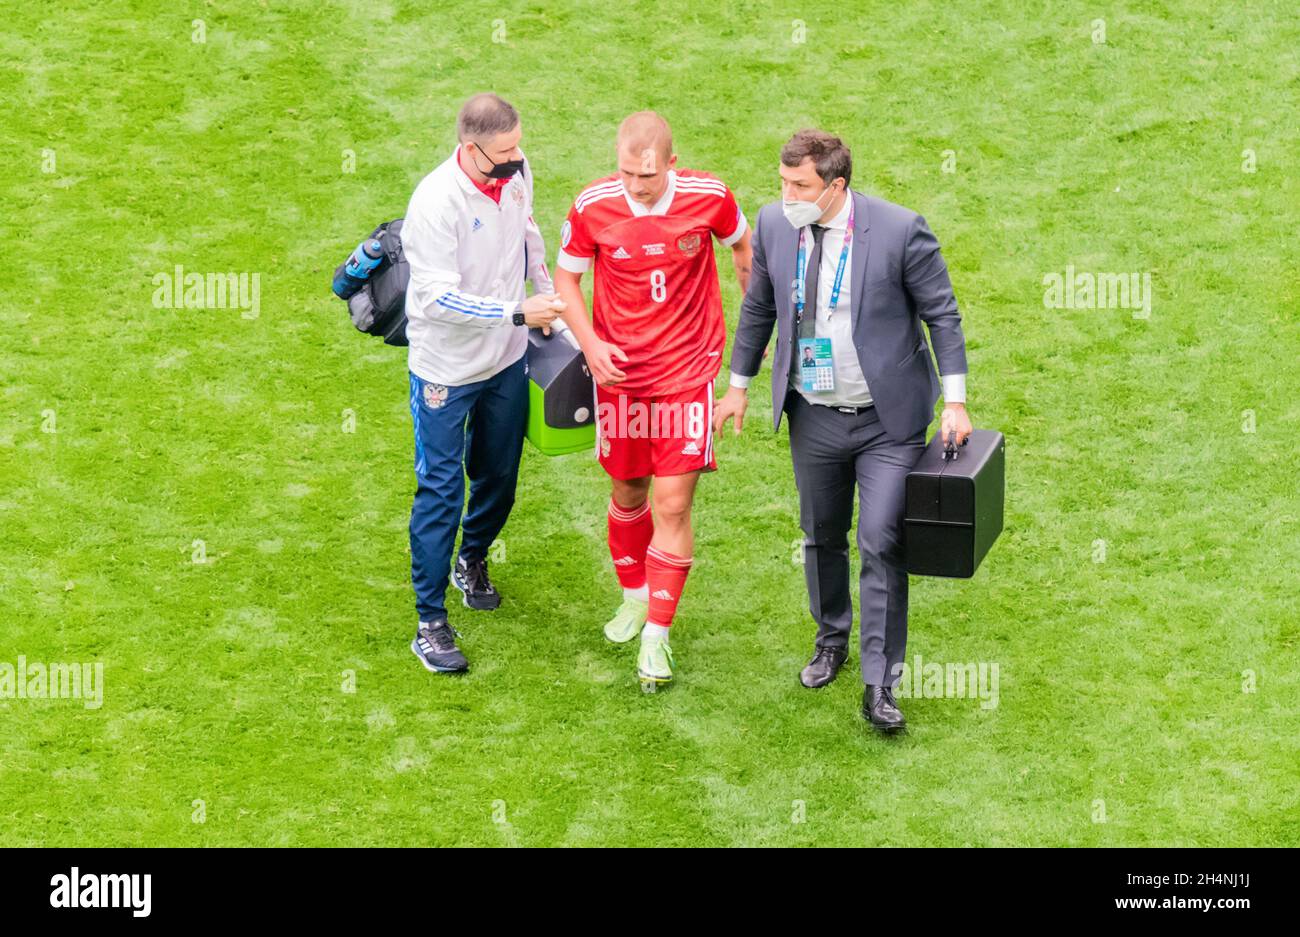 Saint Petersburg, Russia – June 16, 2021. Russia national football team doctors escorting midfielder Dmitri Barinov from the pitch following injury in Stock Photo